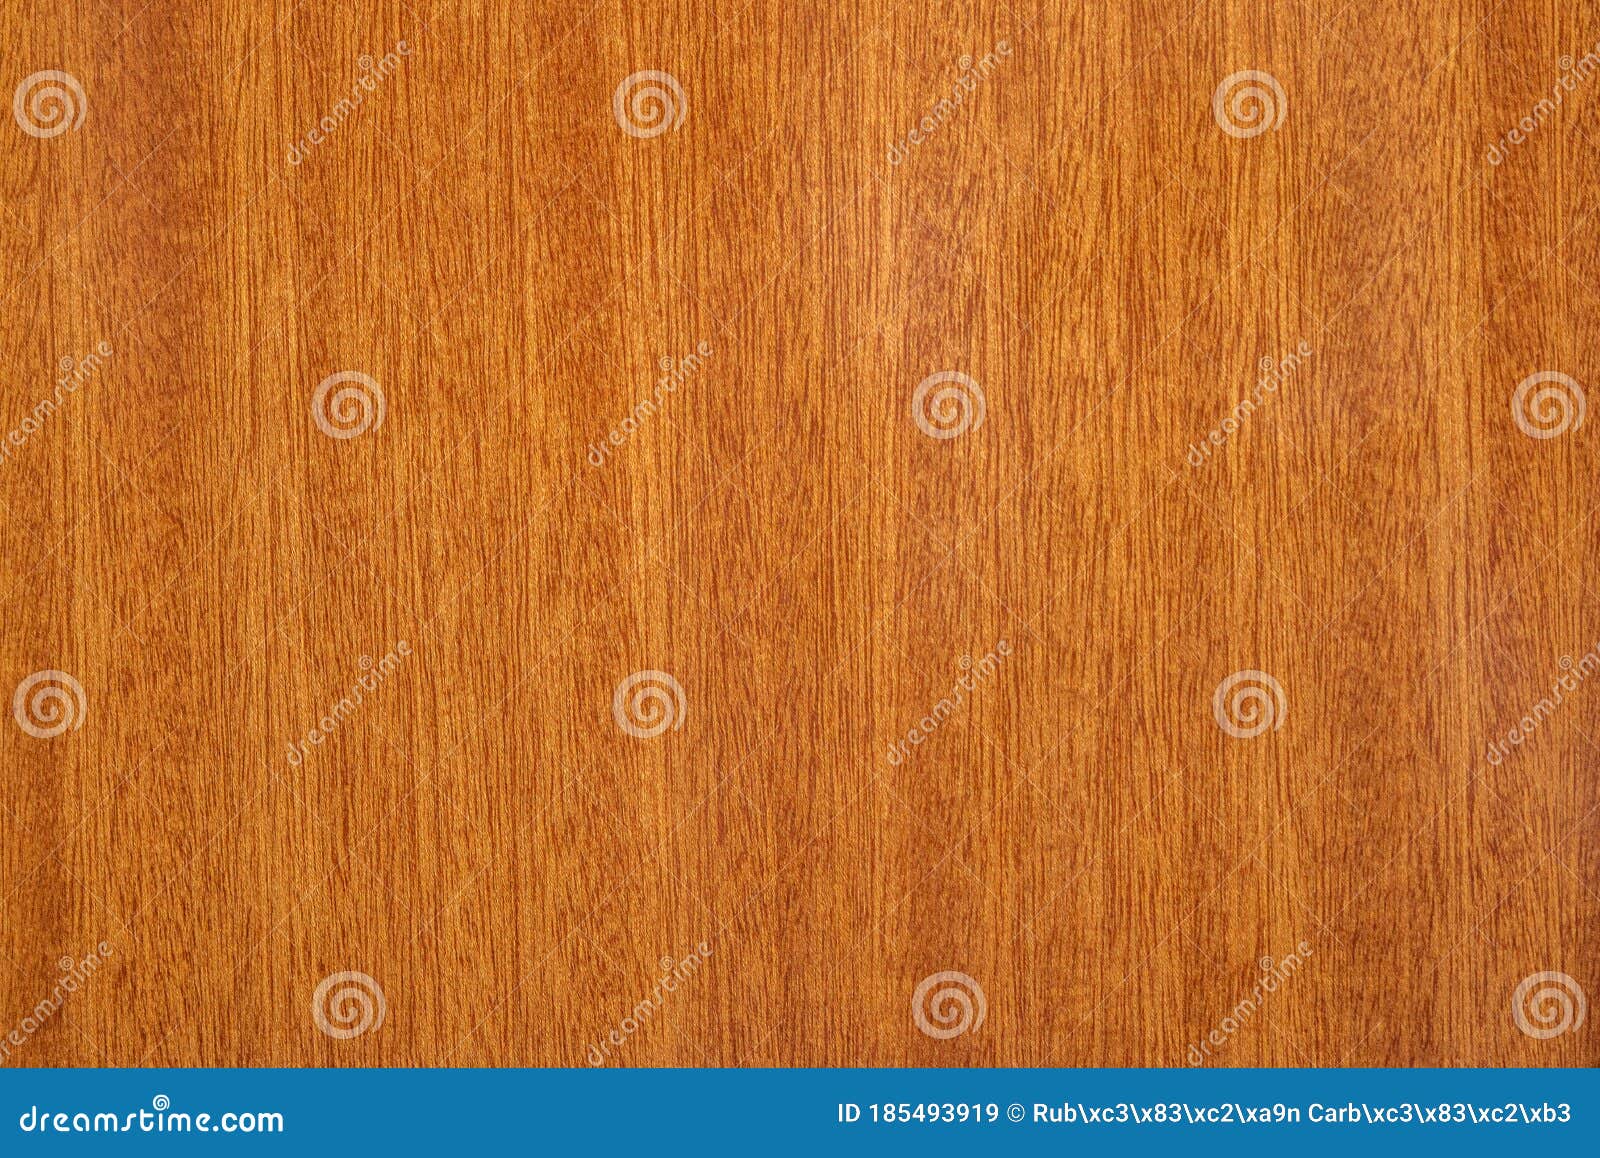 polished wood texture - high resolution resource